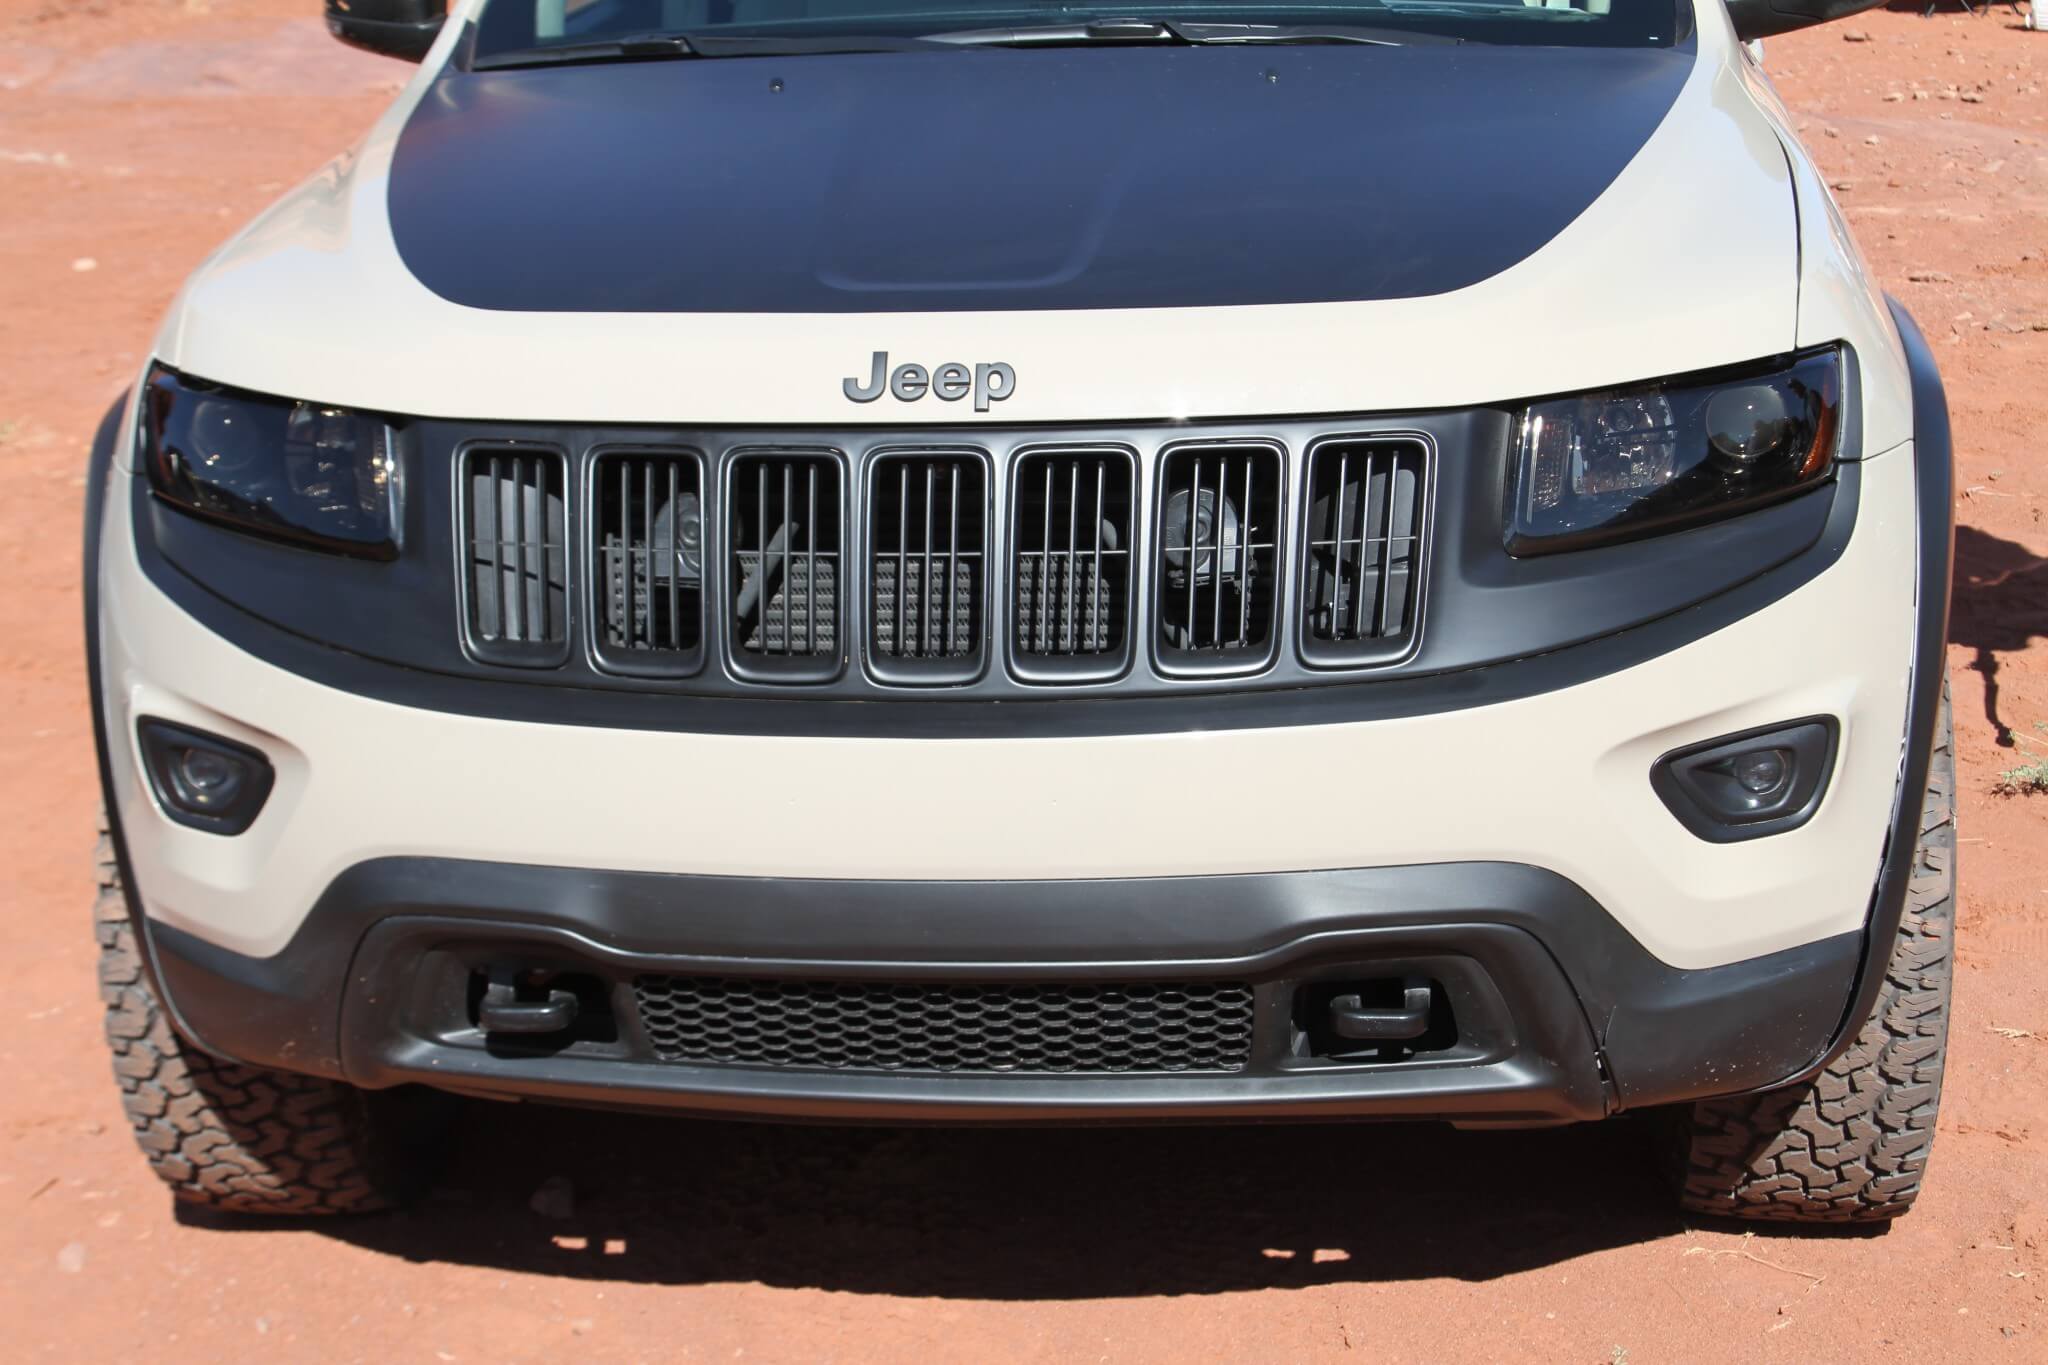 The Mojave Sand exterior color makes the Satin Black accents on the grille really pop. This same treatment is used on the hood, lower front fascia, door handles, mirror caps, wheel flares and badging. 